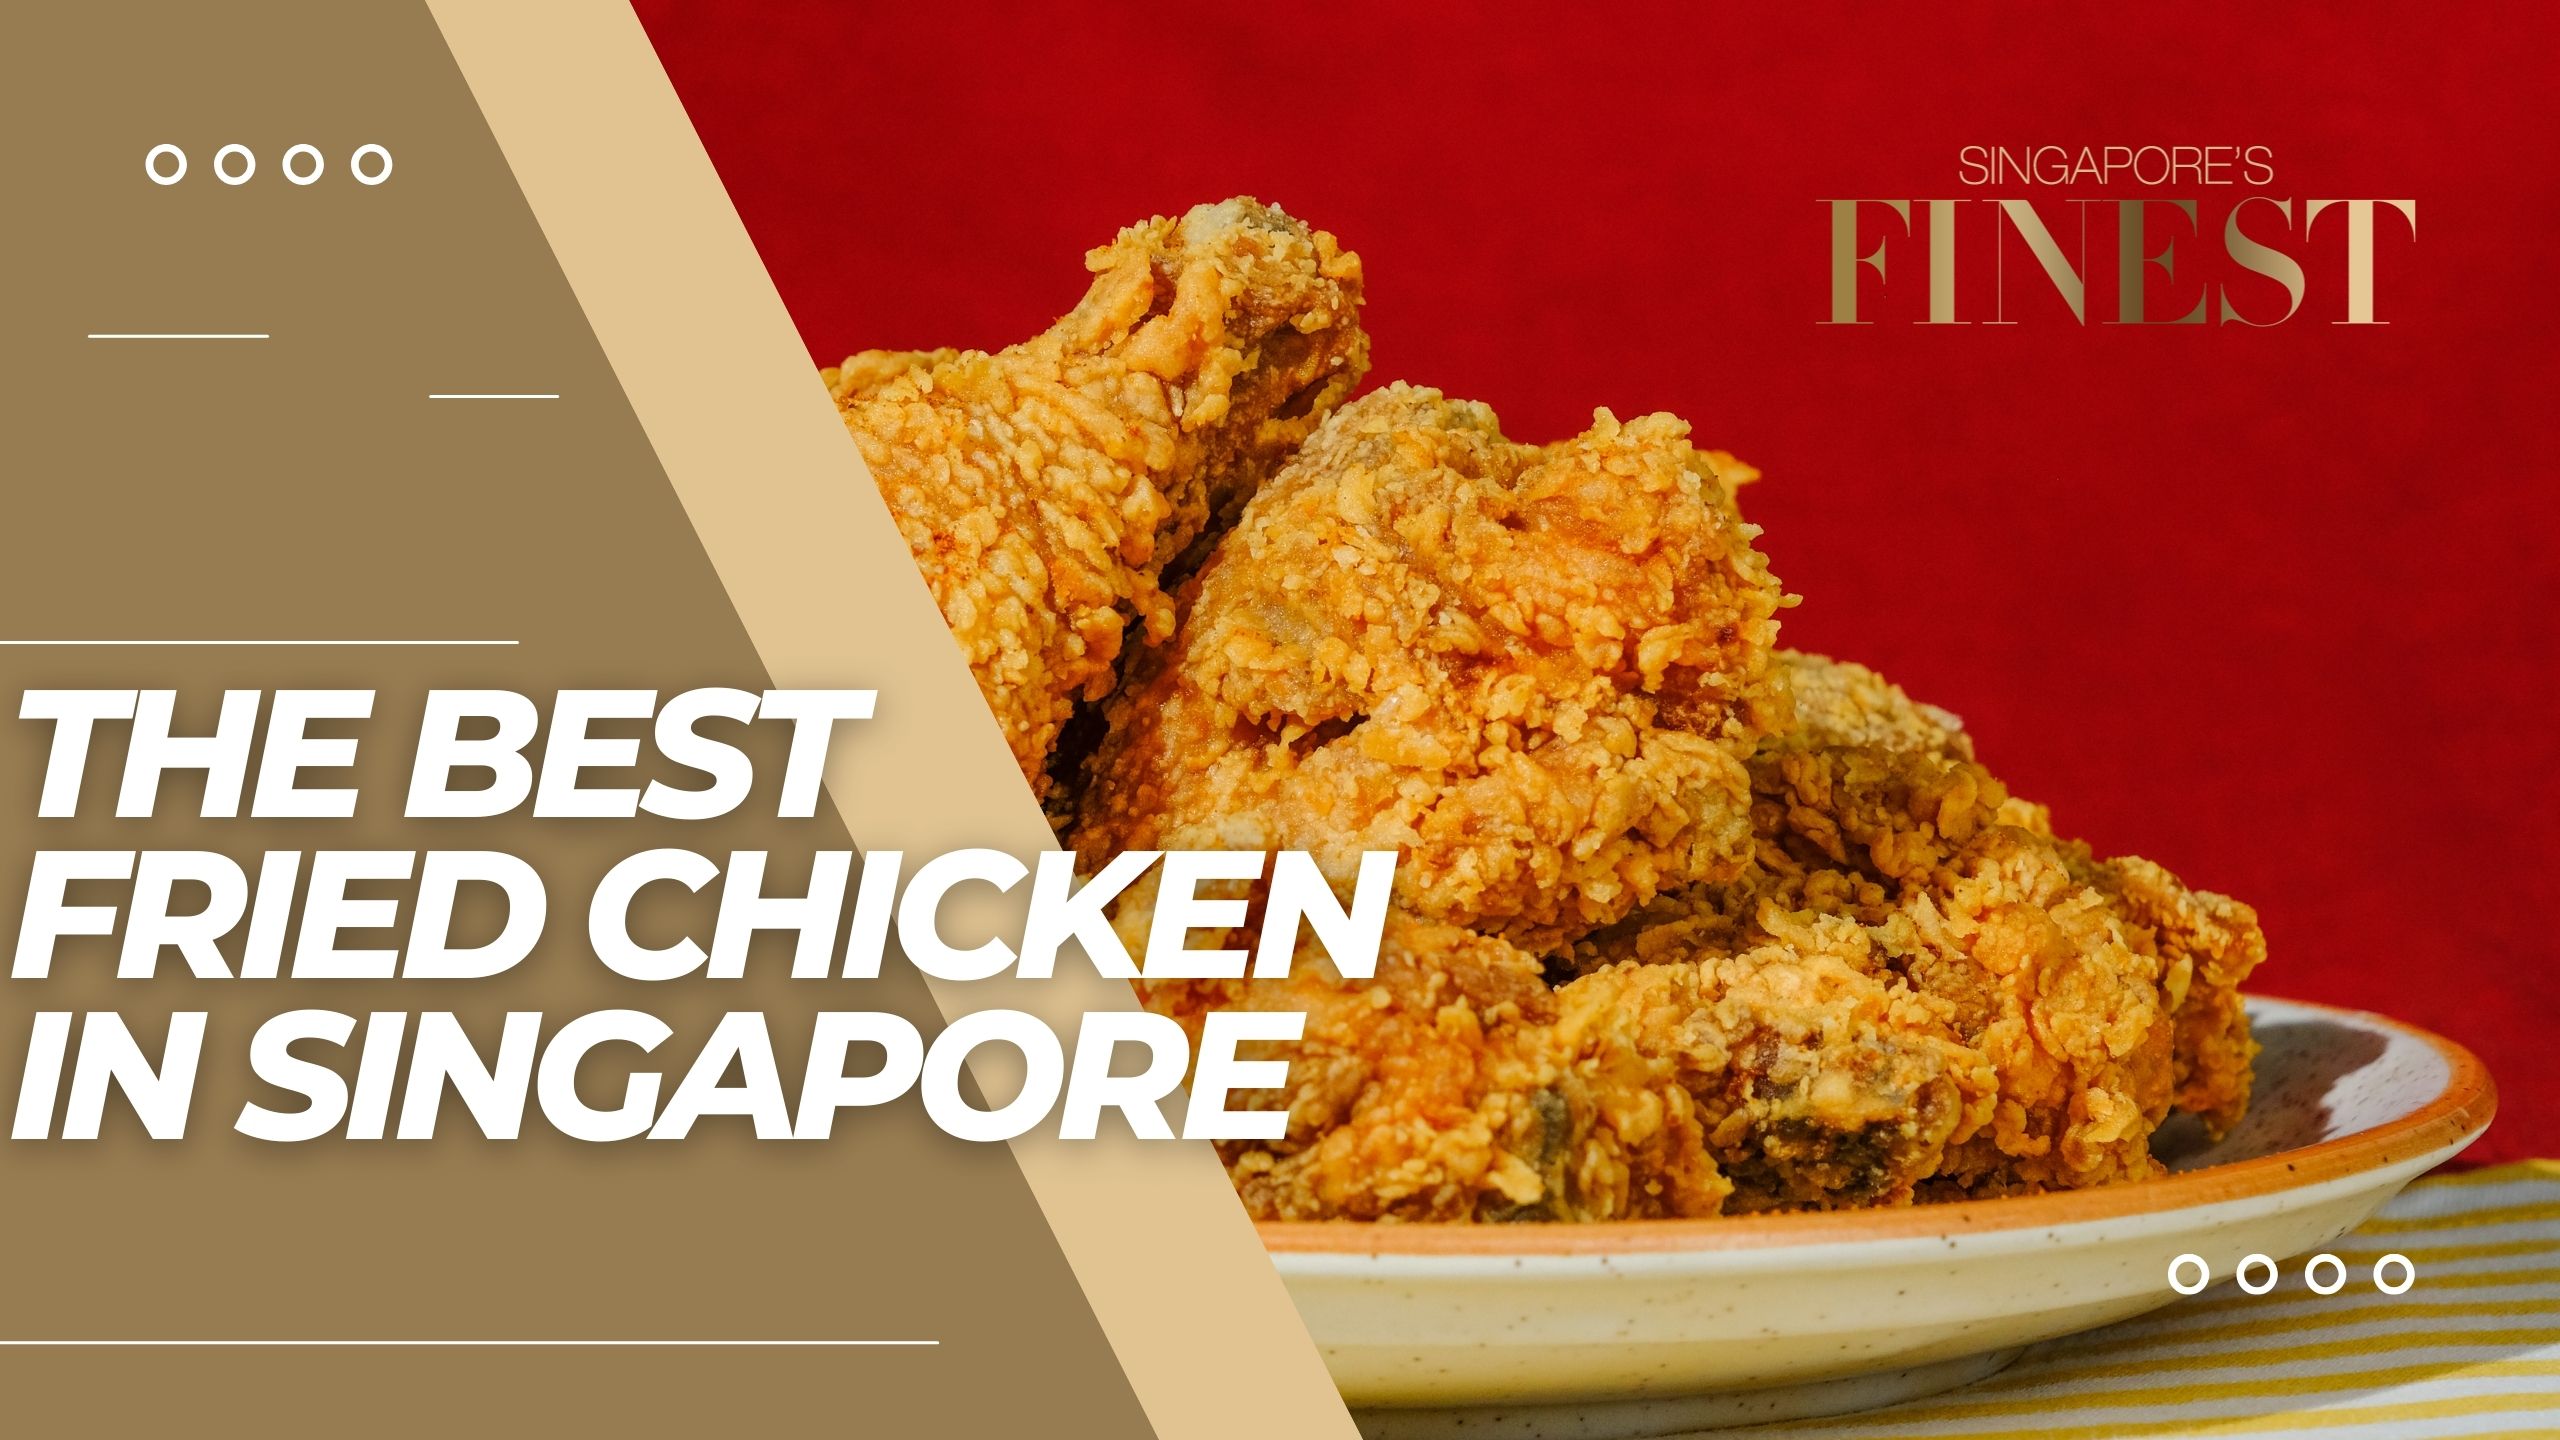 The Finest Fried Chicken in Singapore